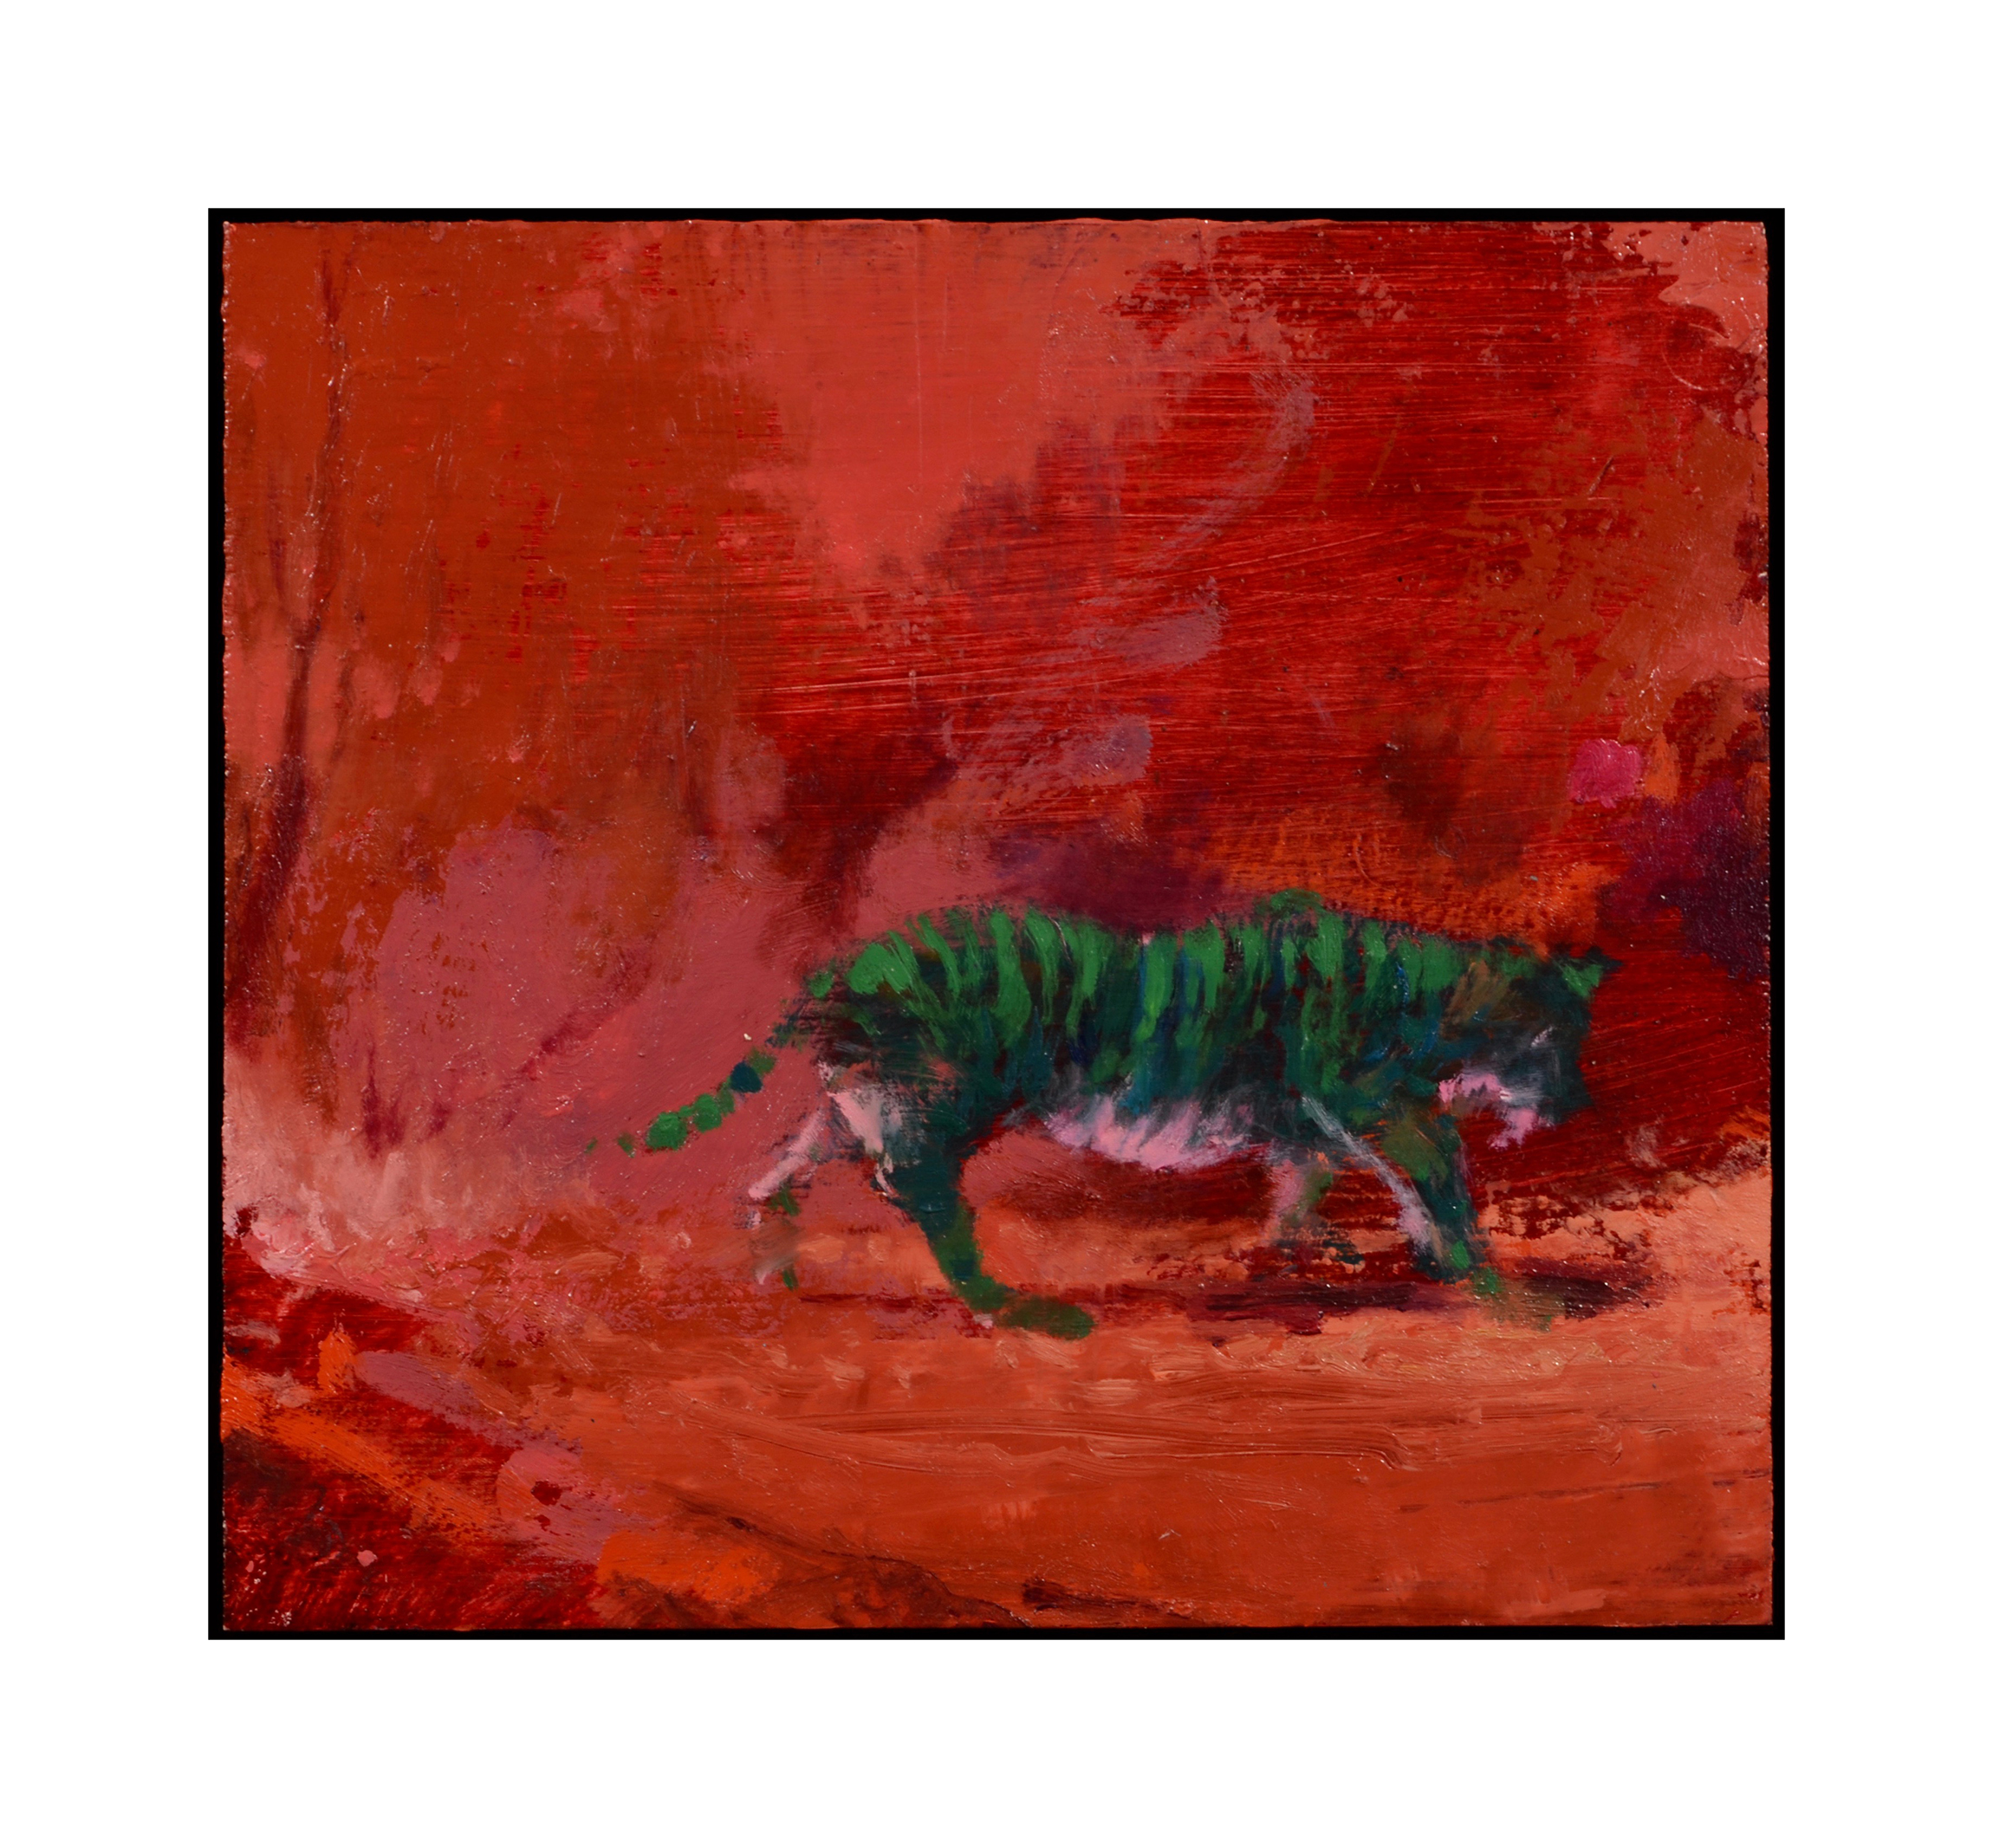   Green Tiger Red , 2017  oil on panel  9 3/4 x 10 3/4 in.       